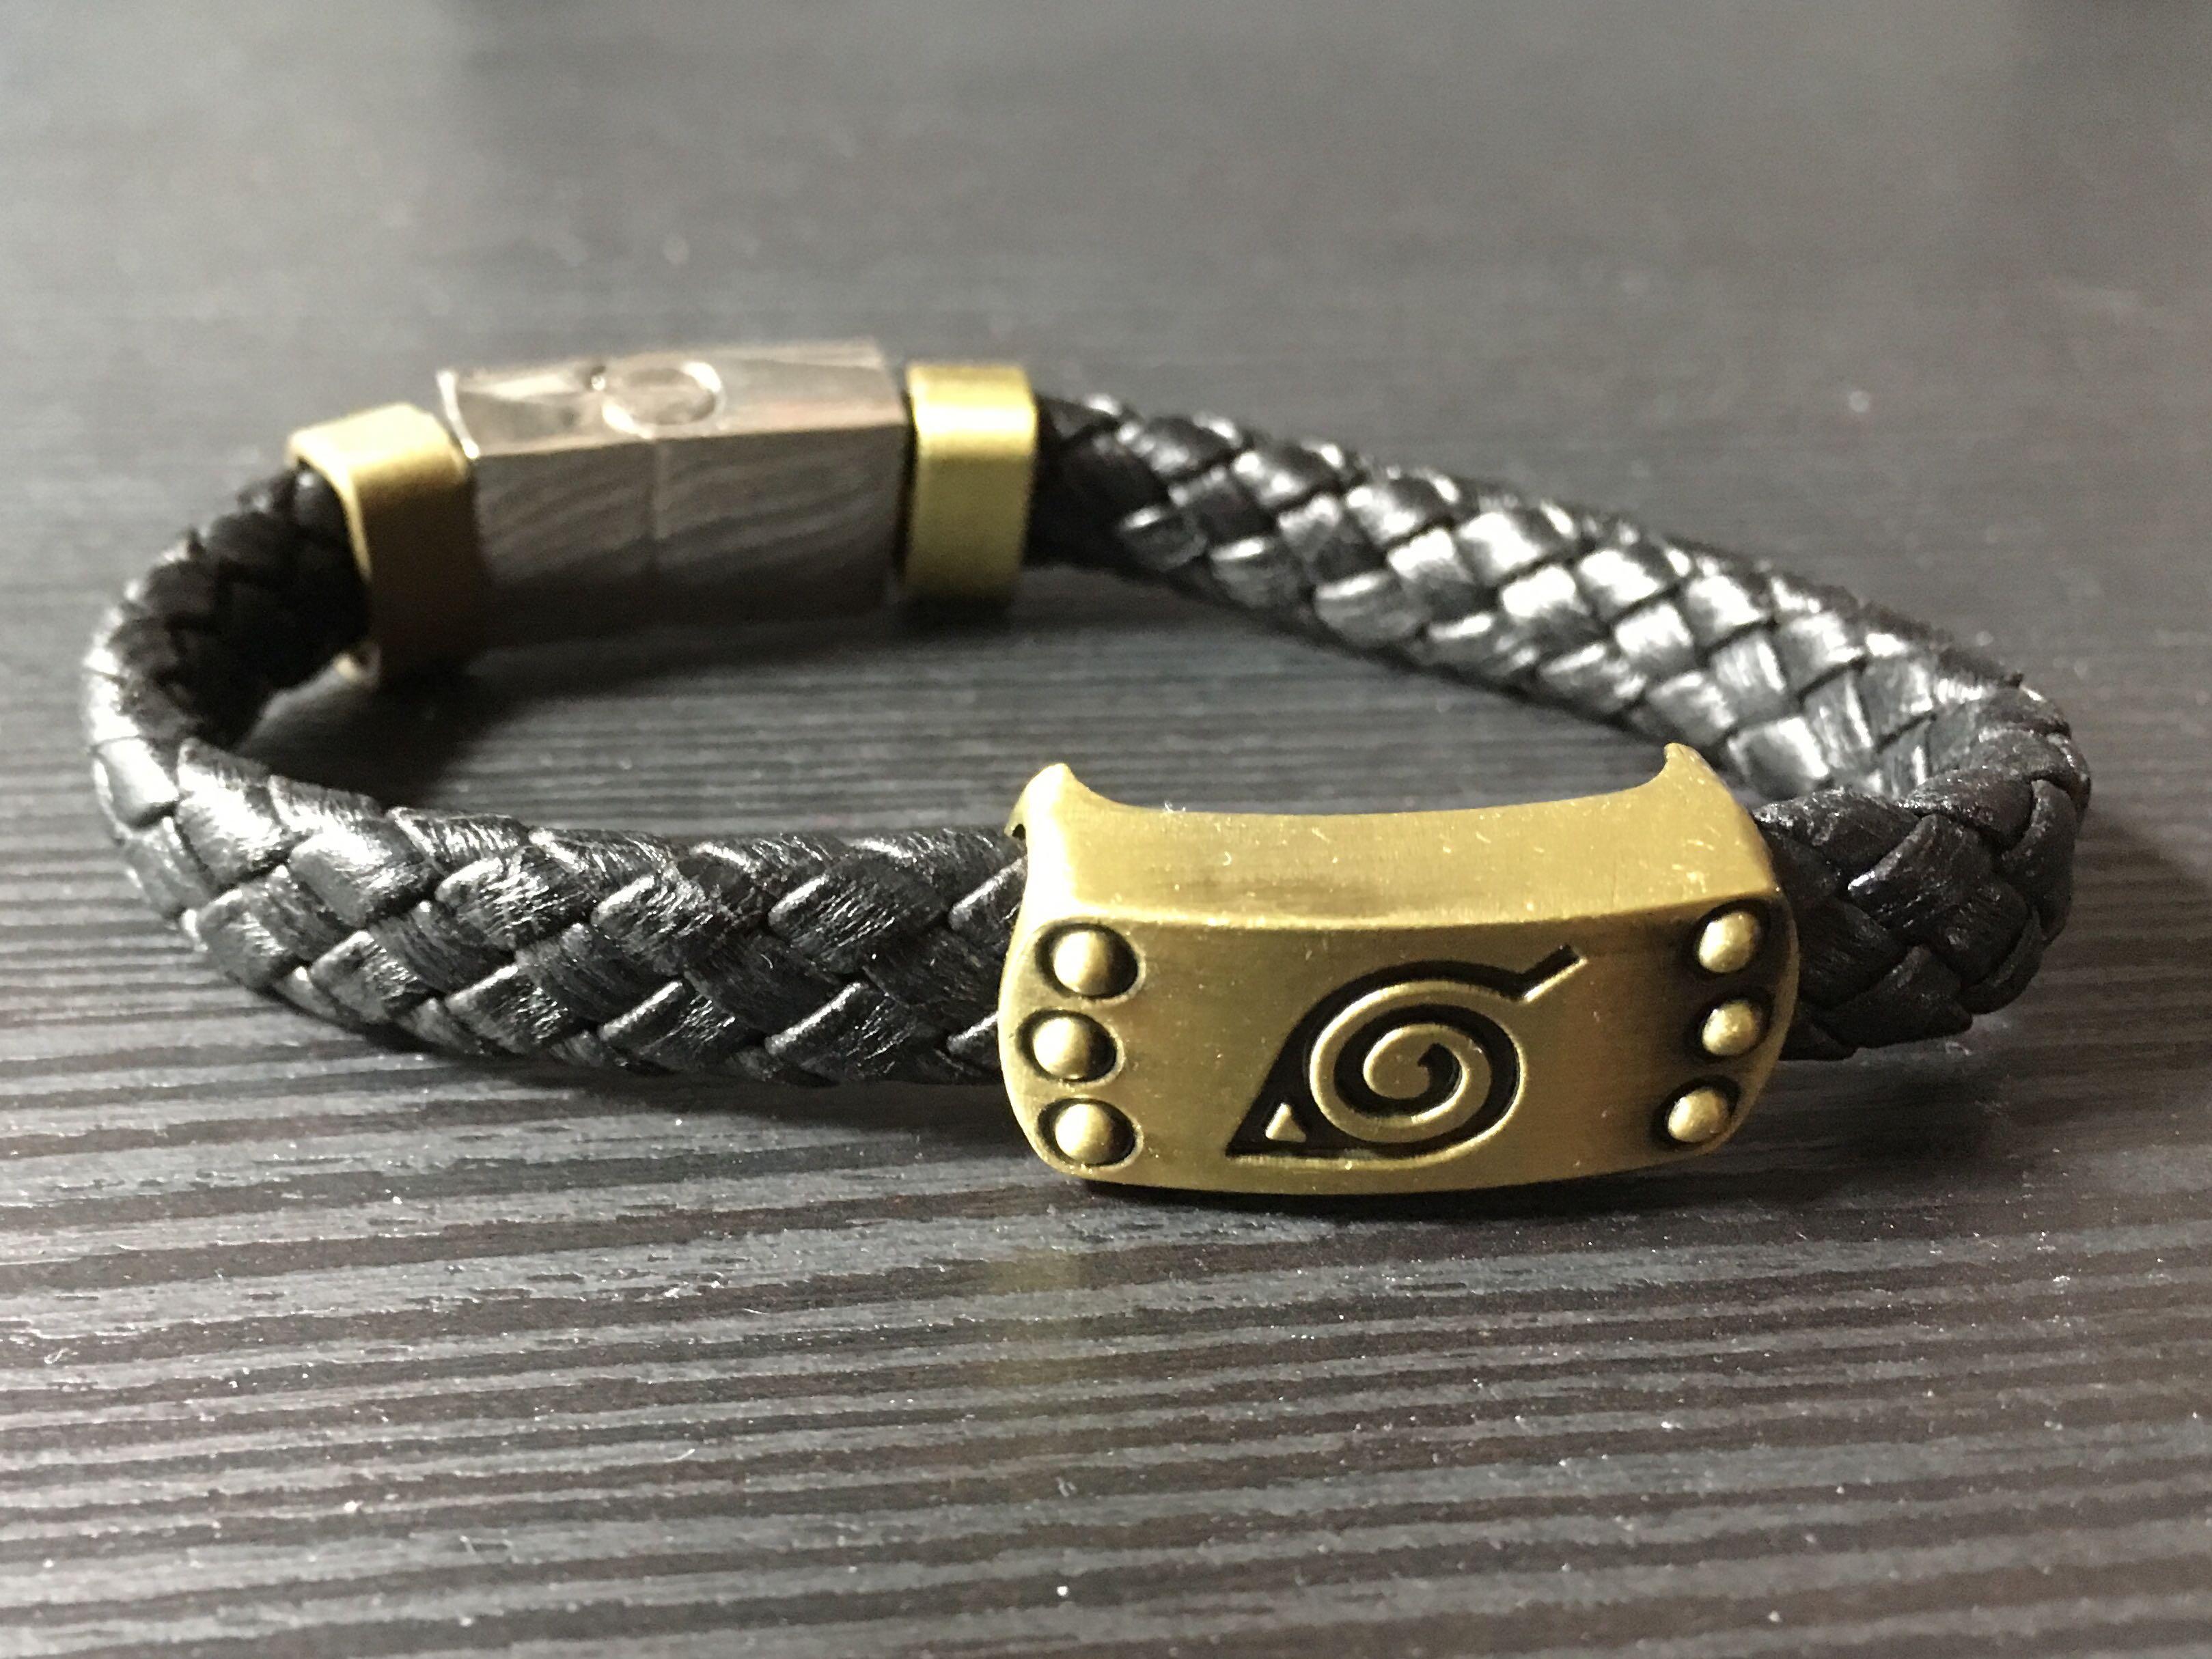 Naruto bracelet made of quality materials. — Adilsons